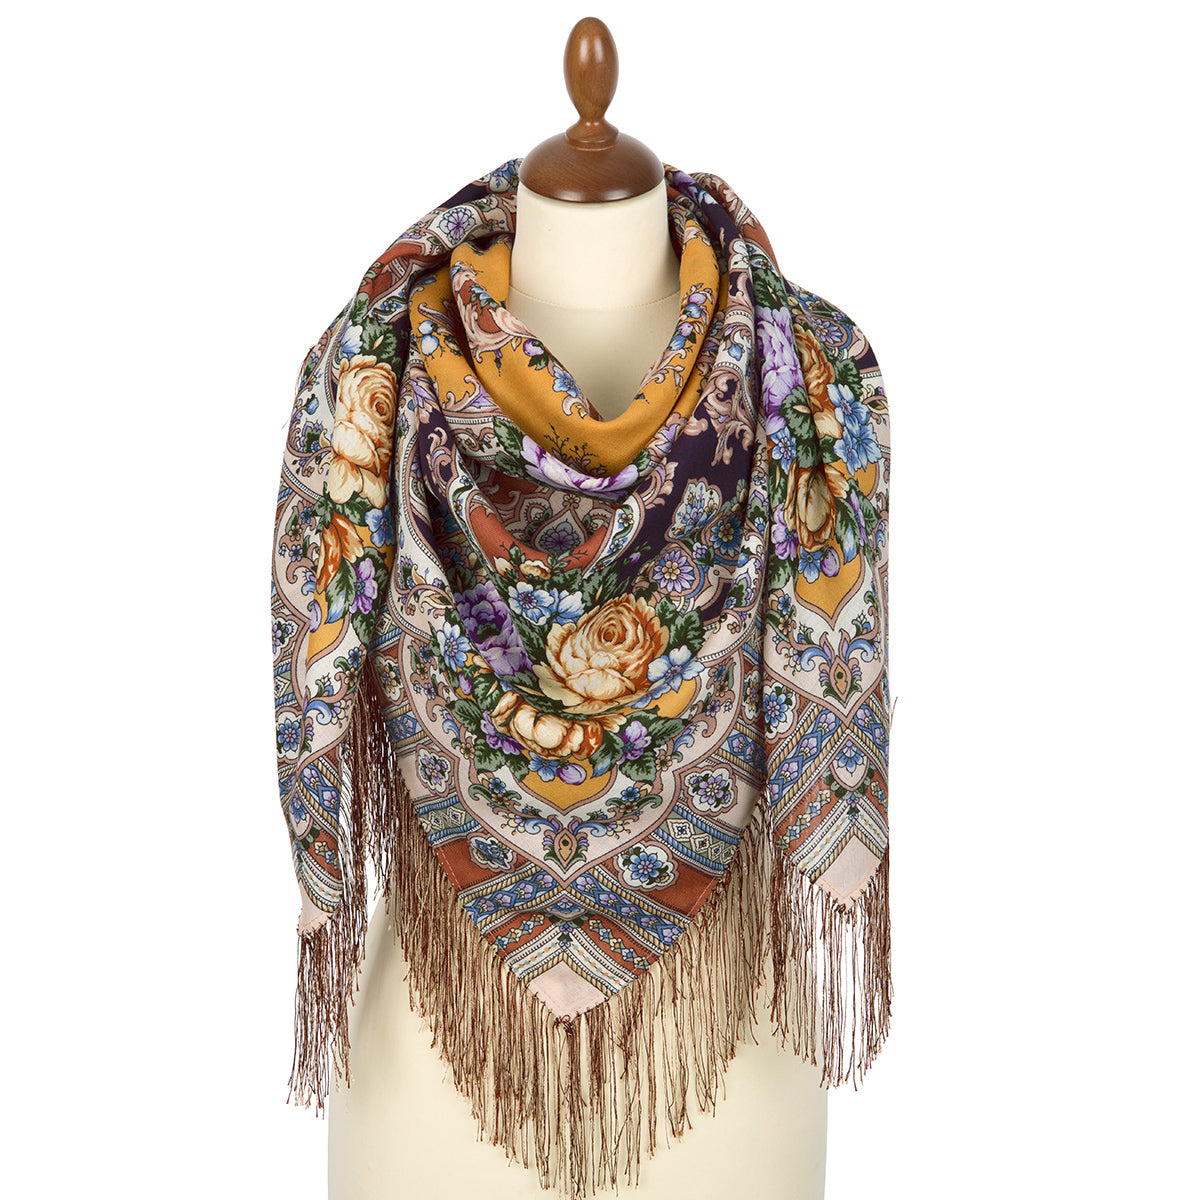 Shawl  "Mysterious Image"